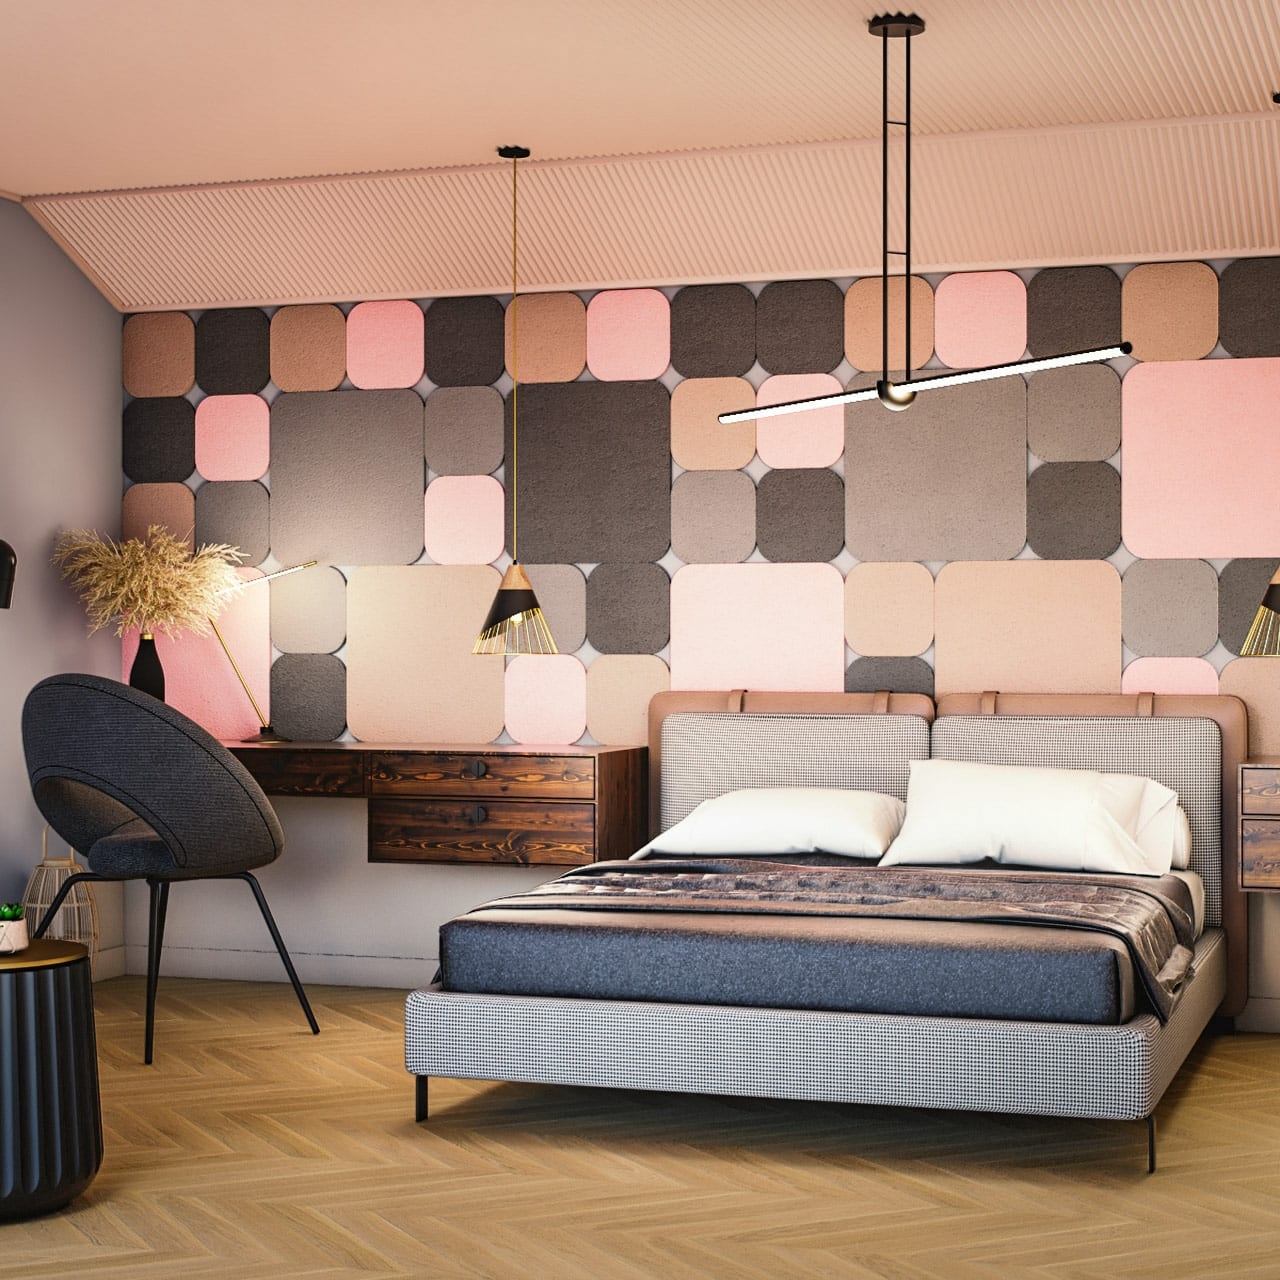 Composition of multicolored acoustic tiles on the wall in bedroom